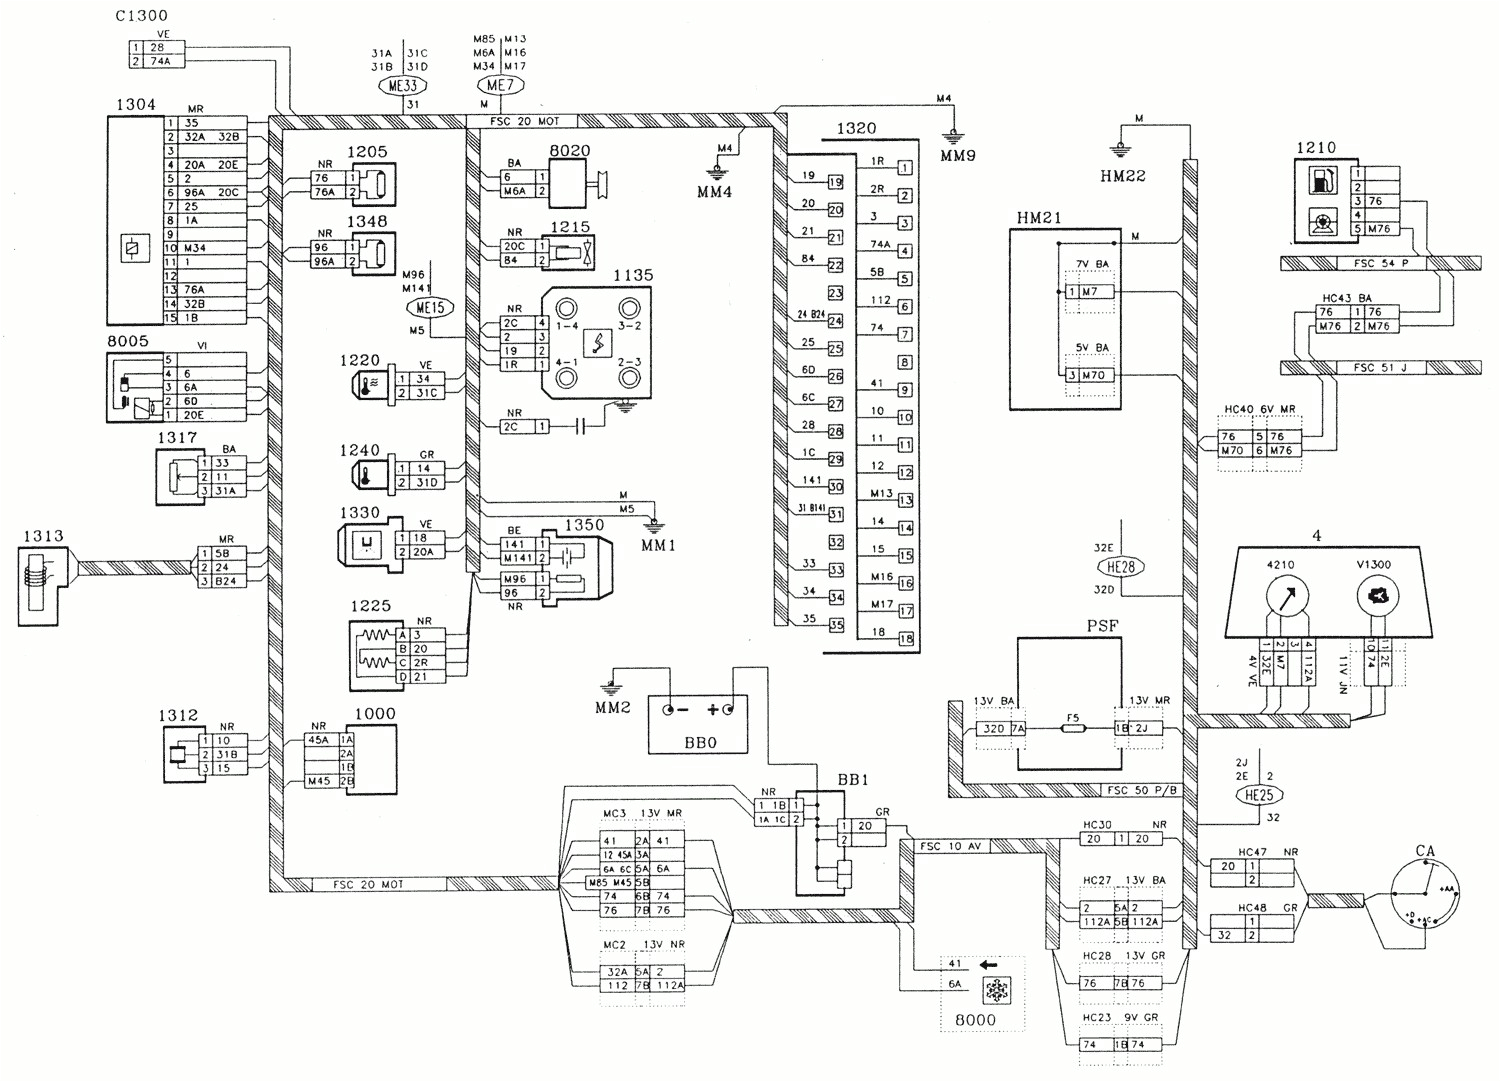 citroen c3 engine diagram peugeot 405 xu5m3z engine mmfd g6 monopoint injection ignition gif